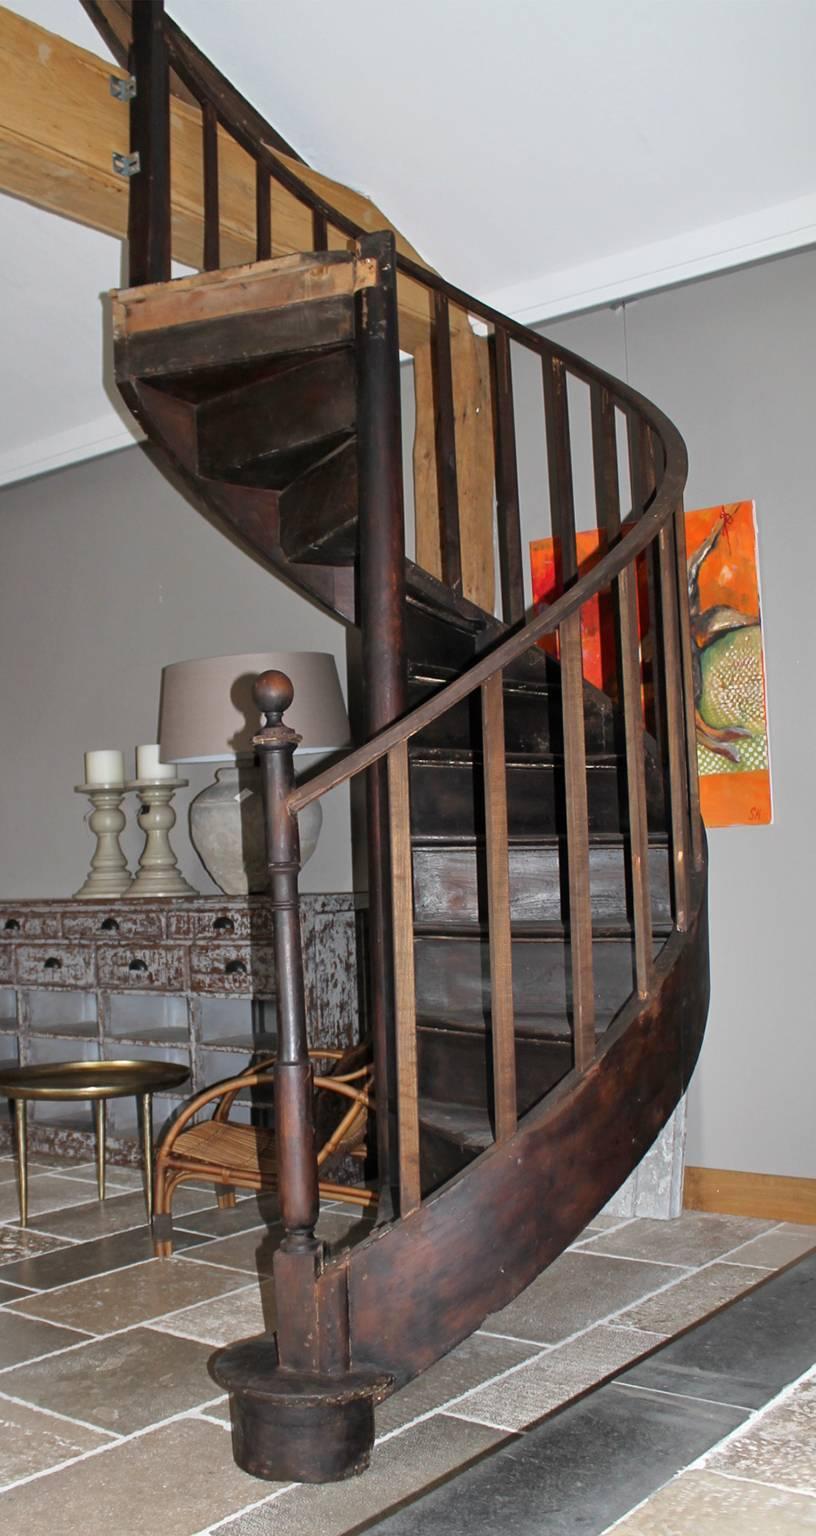 Beautiful spiral staircase made out of oak.
The staircase was made in the early 19th century
It is a bit restored at the handrail.